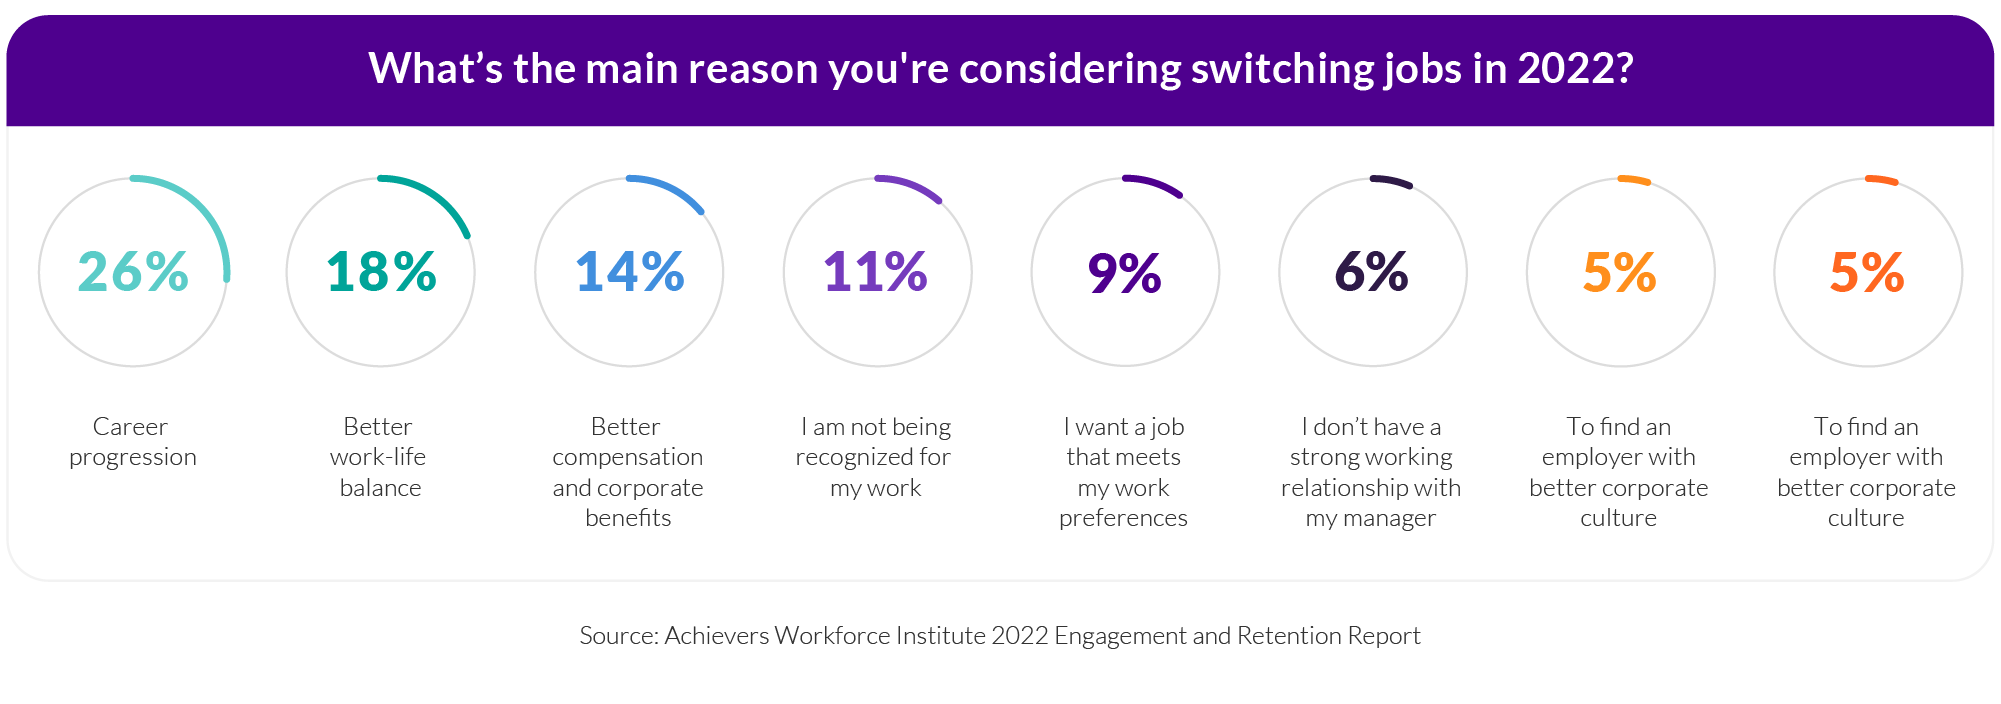 What's the main reason you're considering switching jobs in 2022?